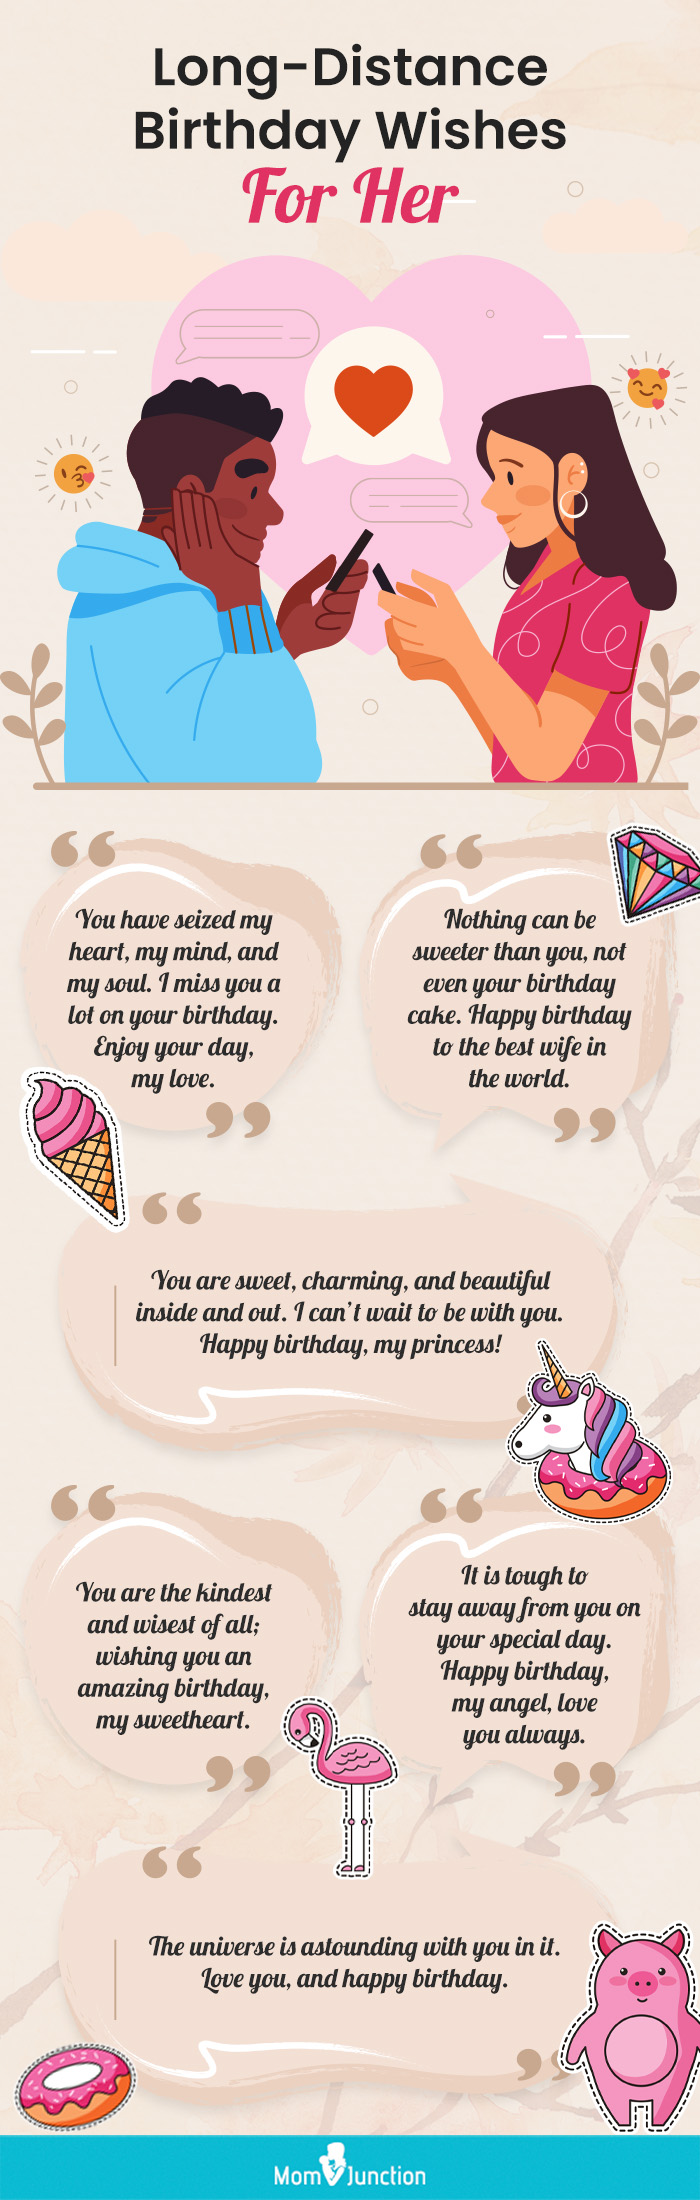 long distance birthday wishes for her (infographic)